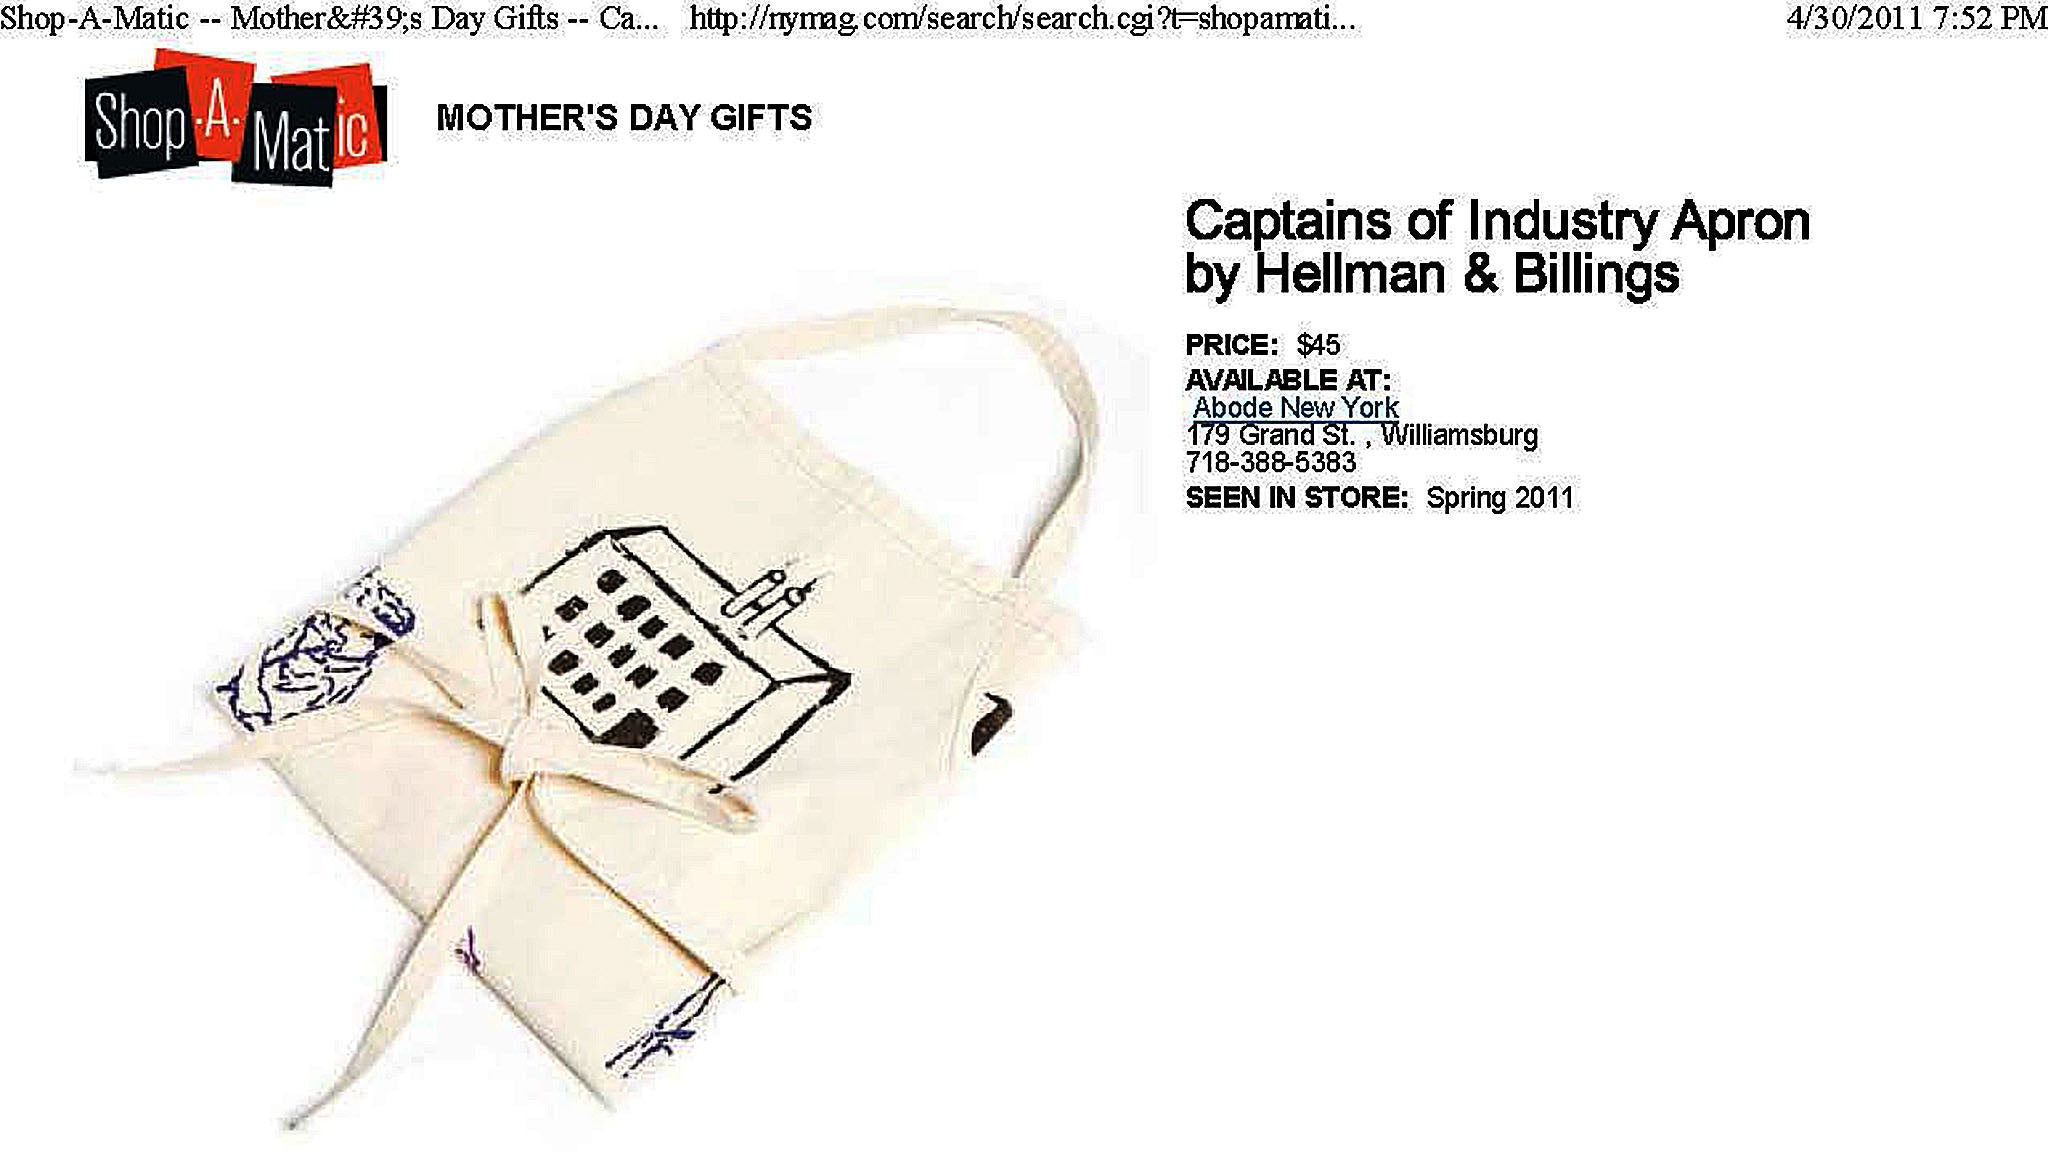 New York Magazine, Shop-a-Matic 2011 Mother's Day Gift Guide: Captains of Industry apron by Hellman & Billings, Nouma Salt & Pepper shakers by Ceramik B and Marla Dawn's Two for Tea teapot set and Nick Munro's Mercury Glass Cake Stand, April 30, 2011. 